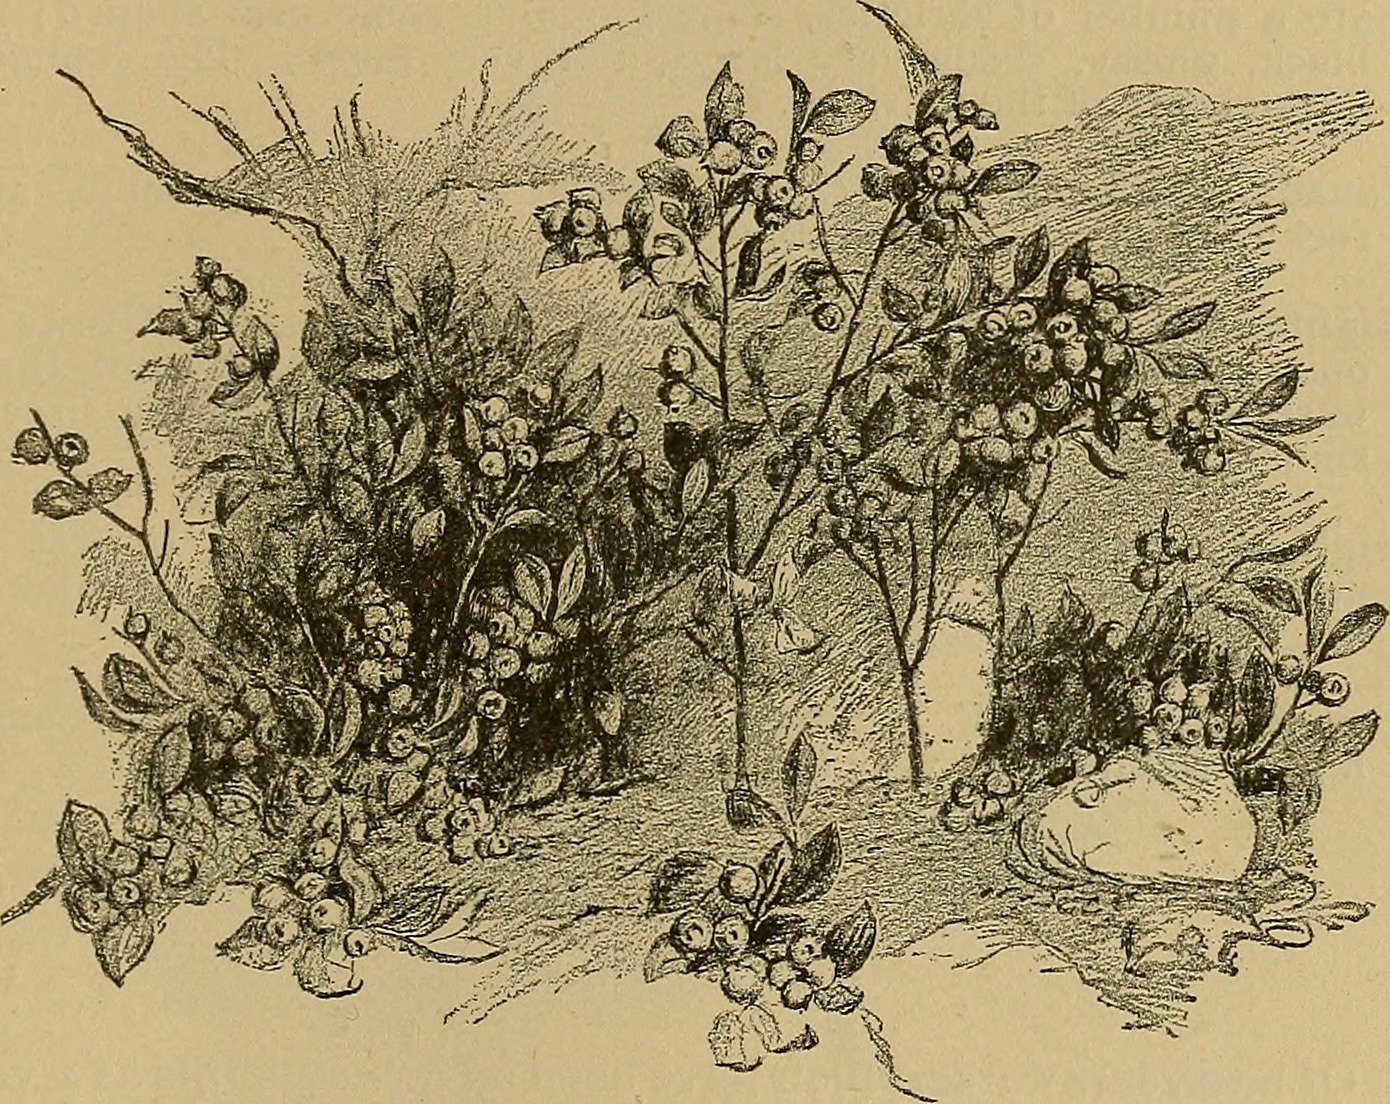 Image from page 638 of "The American fruit culturist" (1903)